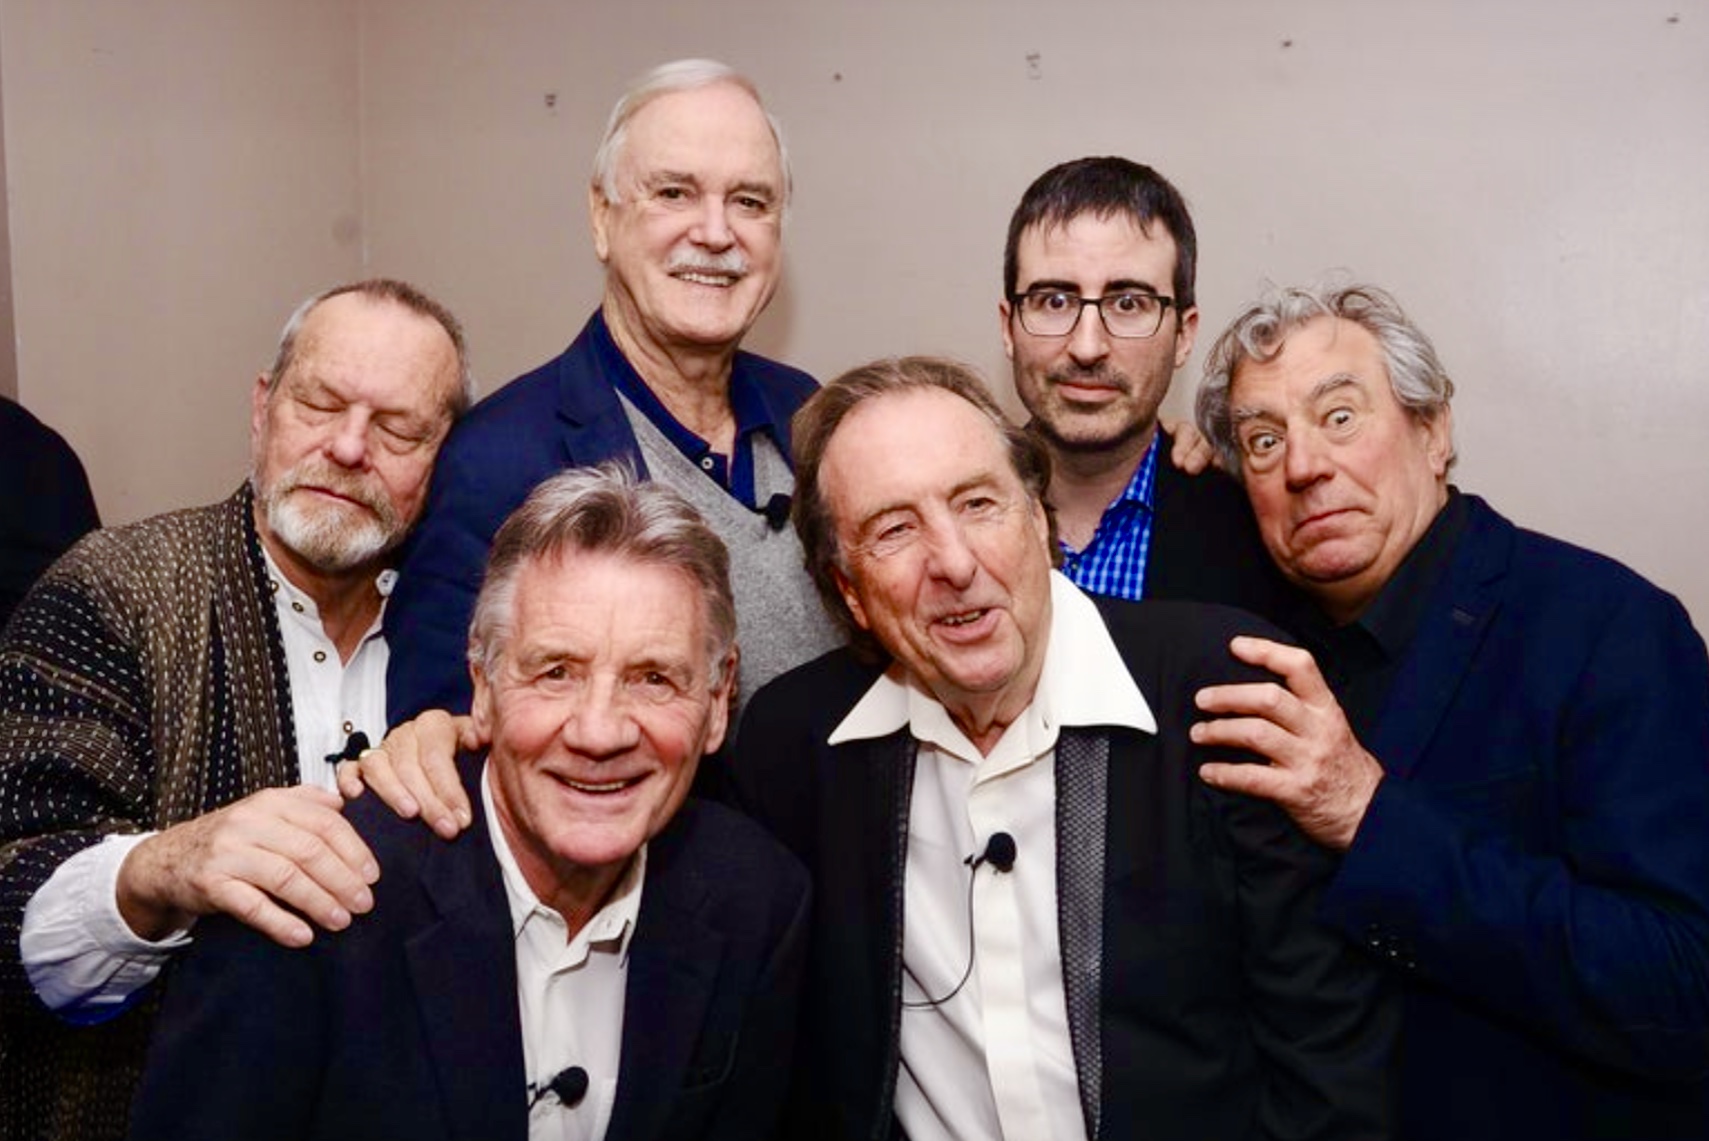 John Cleese, Terry Gilliam, Eric Idle, Terry Jones, Michael Palin, John Oliver, and Monty Python